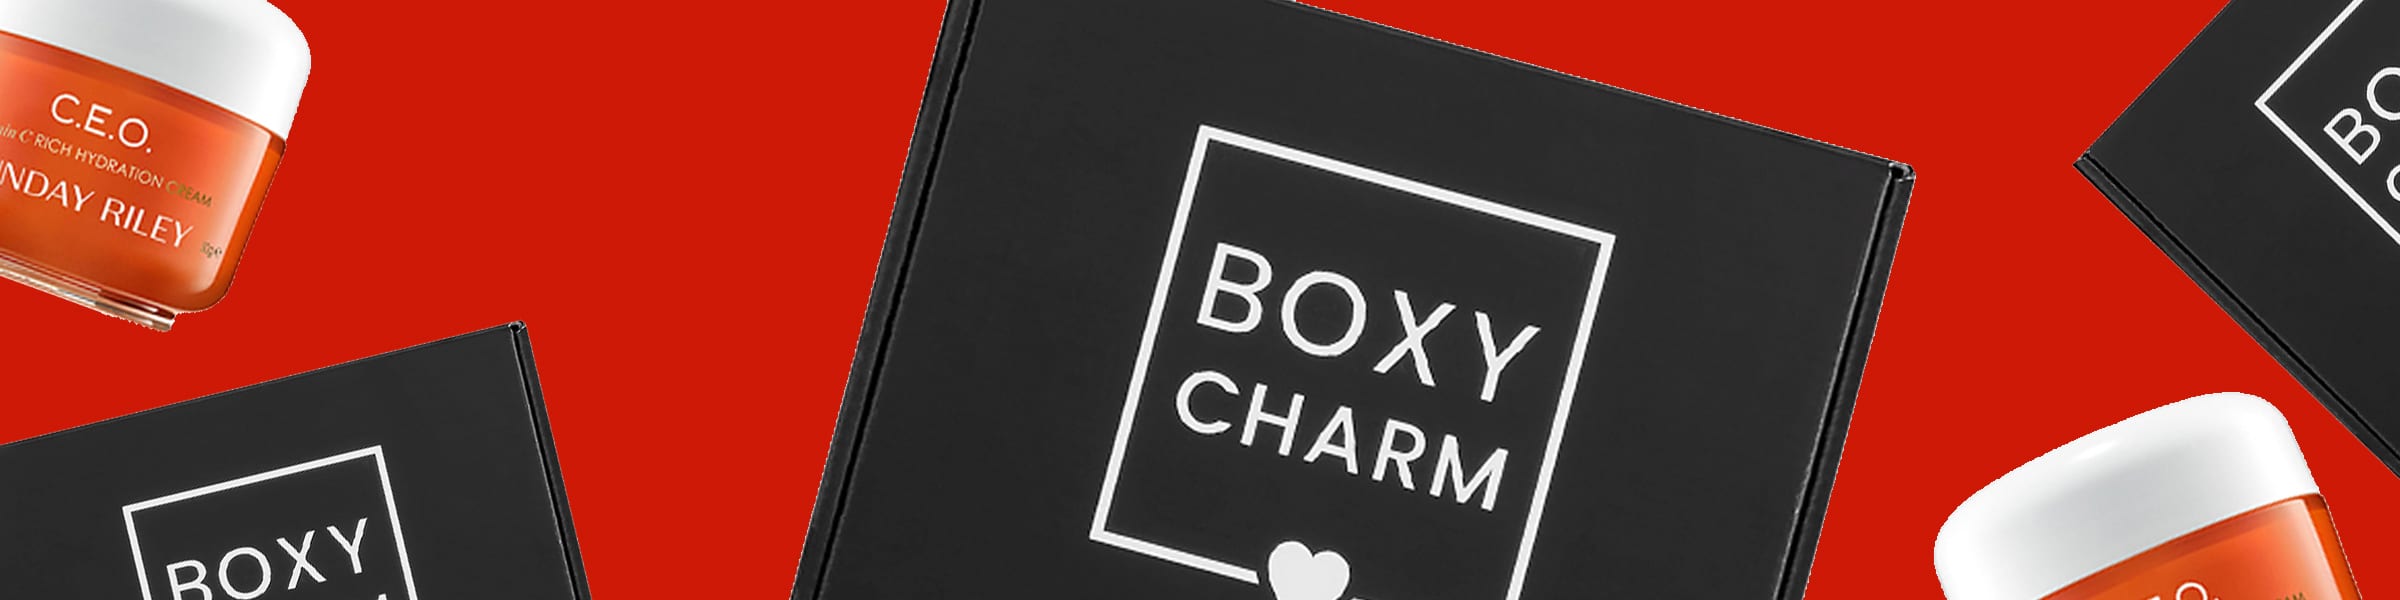 Boxy Charm Case Study - boxes and products